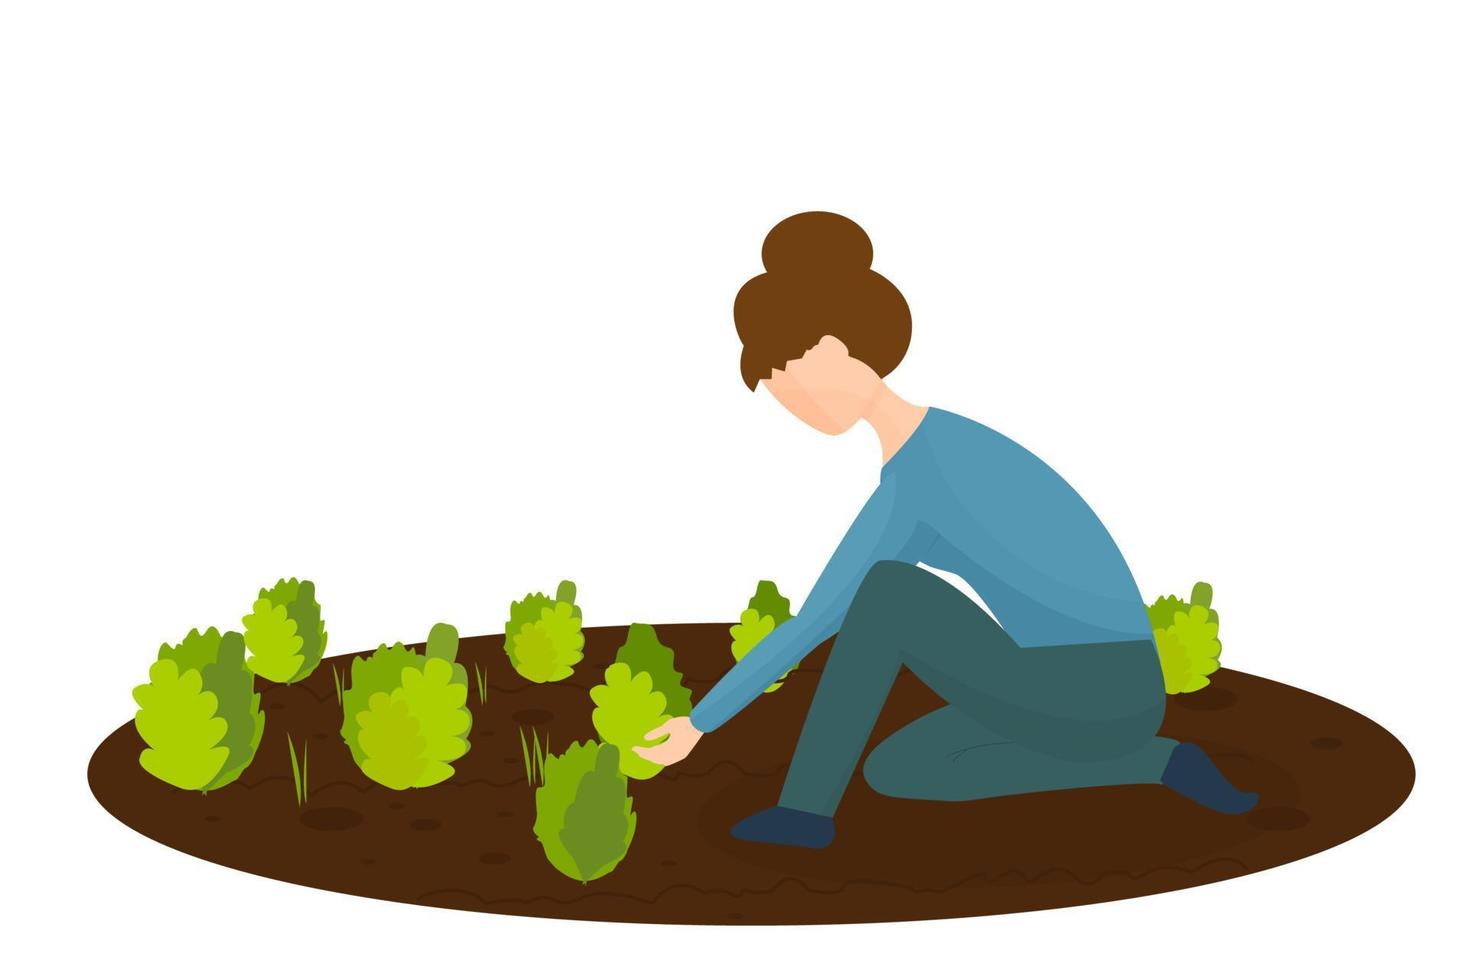 Woman kneeling, working in the garden with plants and grass in vector design. Graphic illustration ecology, agriculture concept, isolated on white background. Stylish countryside